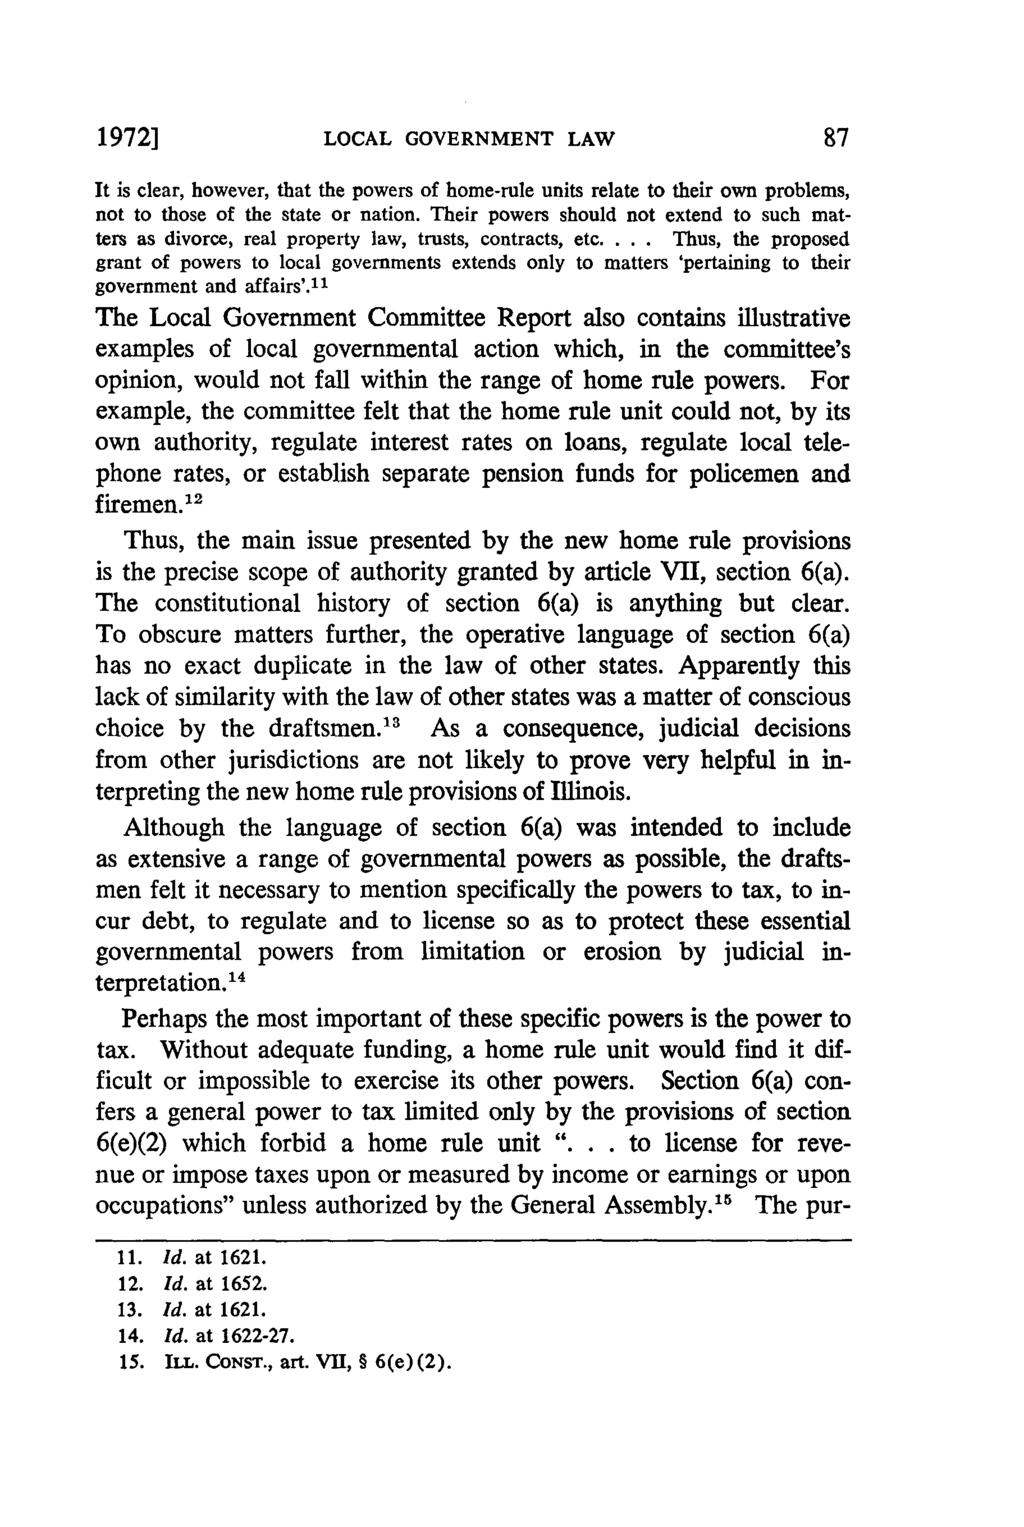 1972] LOCAL GOVERNMENT LAW It is clear, however, that the powers of home-rule units relate to their own problems, not to those of the state or nation.